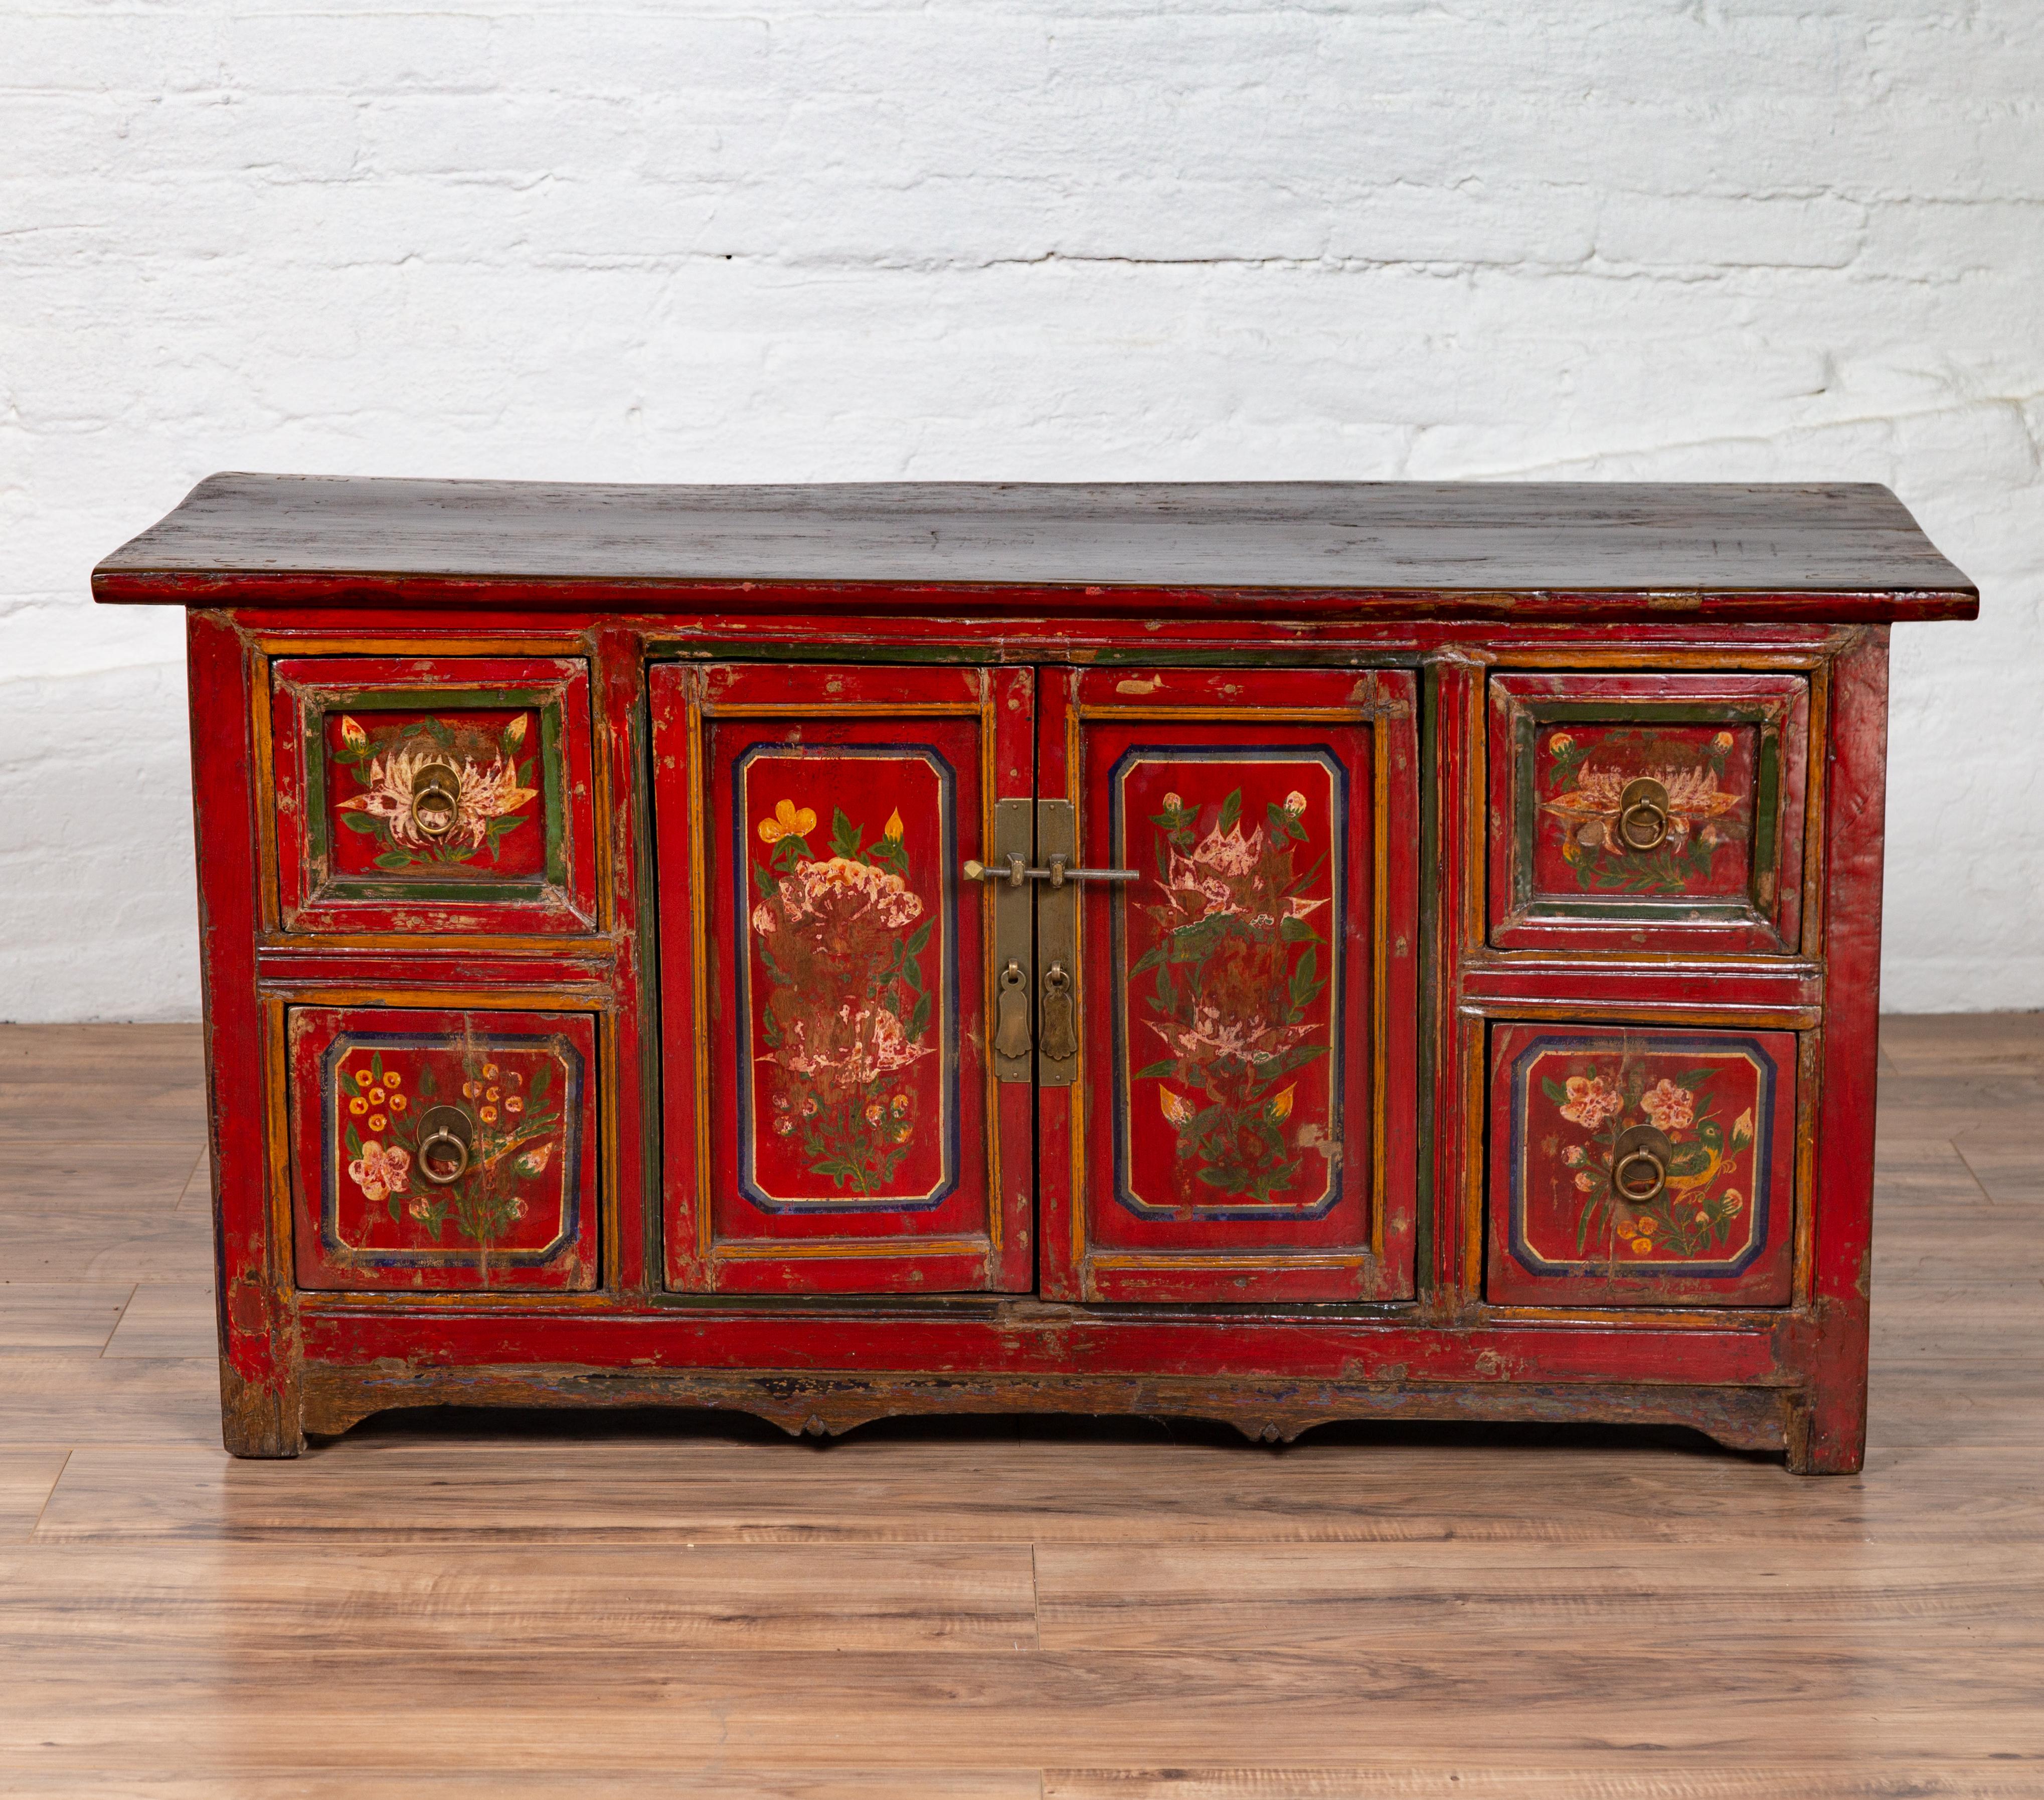 An antique Northern Chinese/Mongolian red lacquered cabinet from the early 20th century, with hand painted floral décor. Born during the early years of the 20th century in the Mongolian / Northern Chinese area, this exquisite cabinet features a